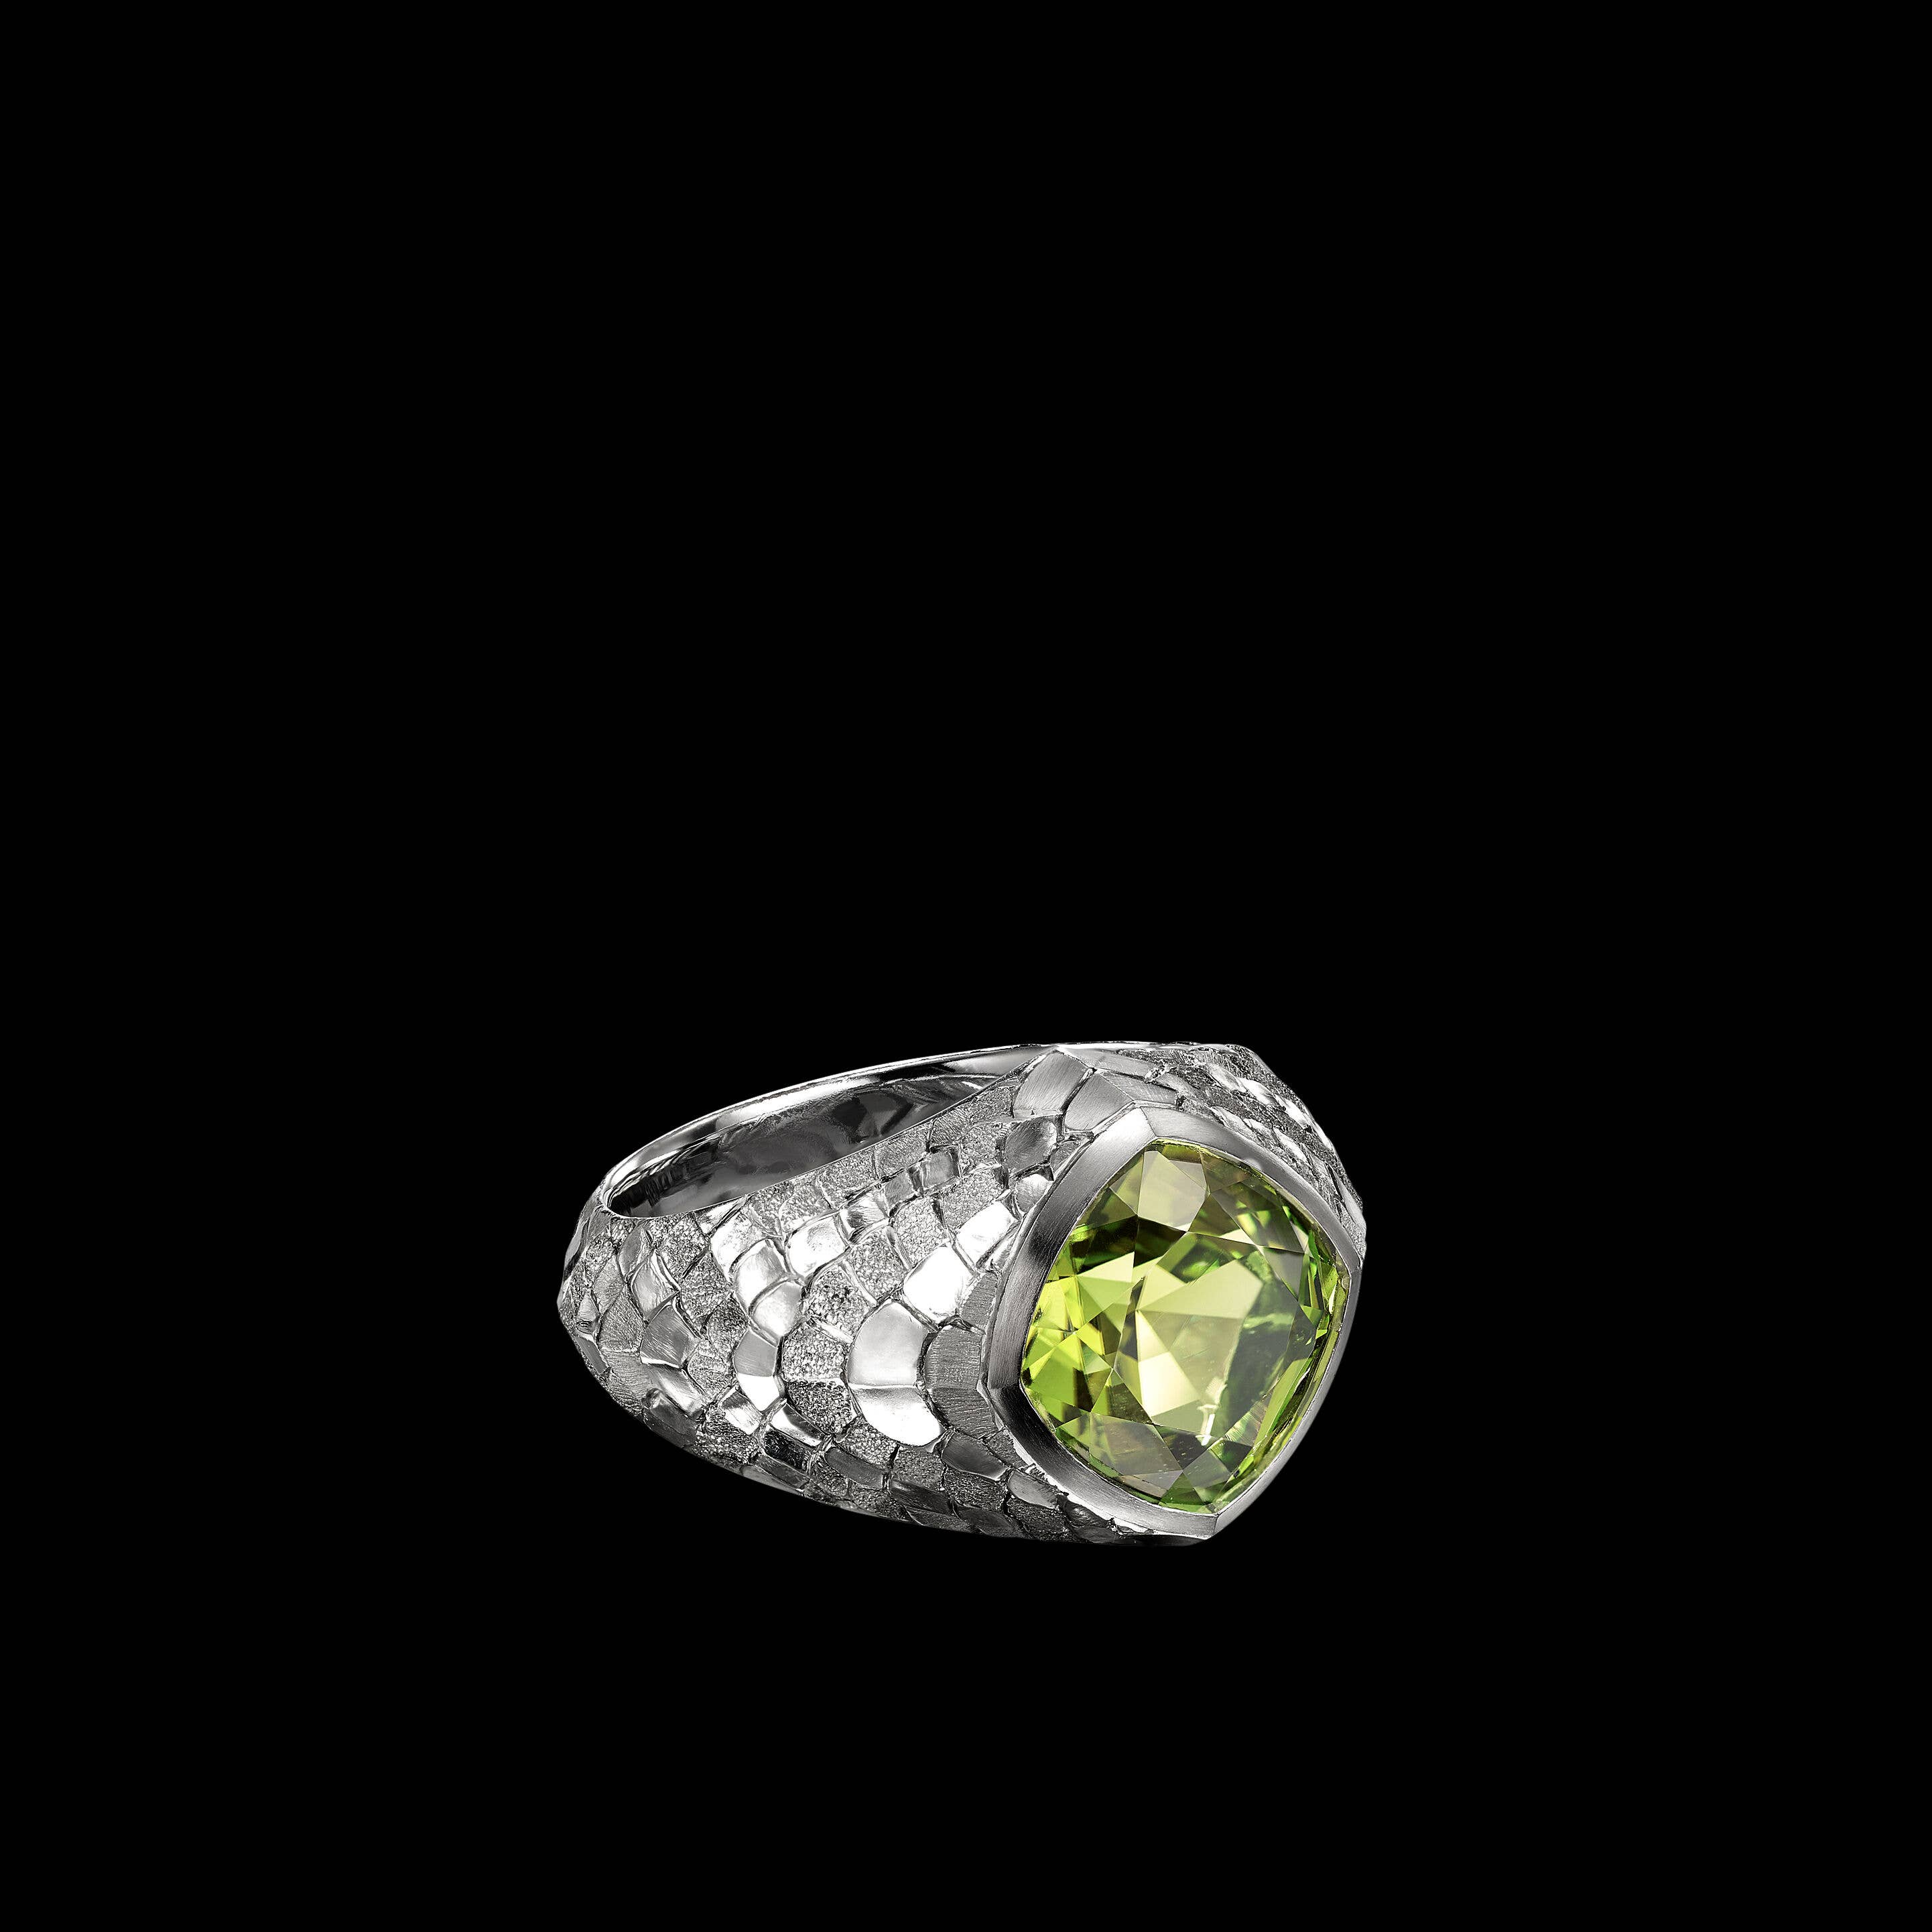 EY® Signature Snake Ring in Platinum with Yellow Green Tourmaline